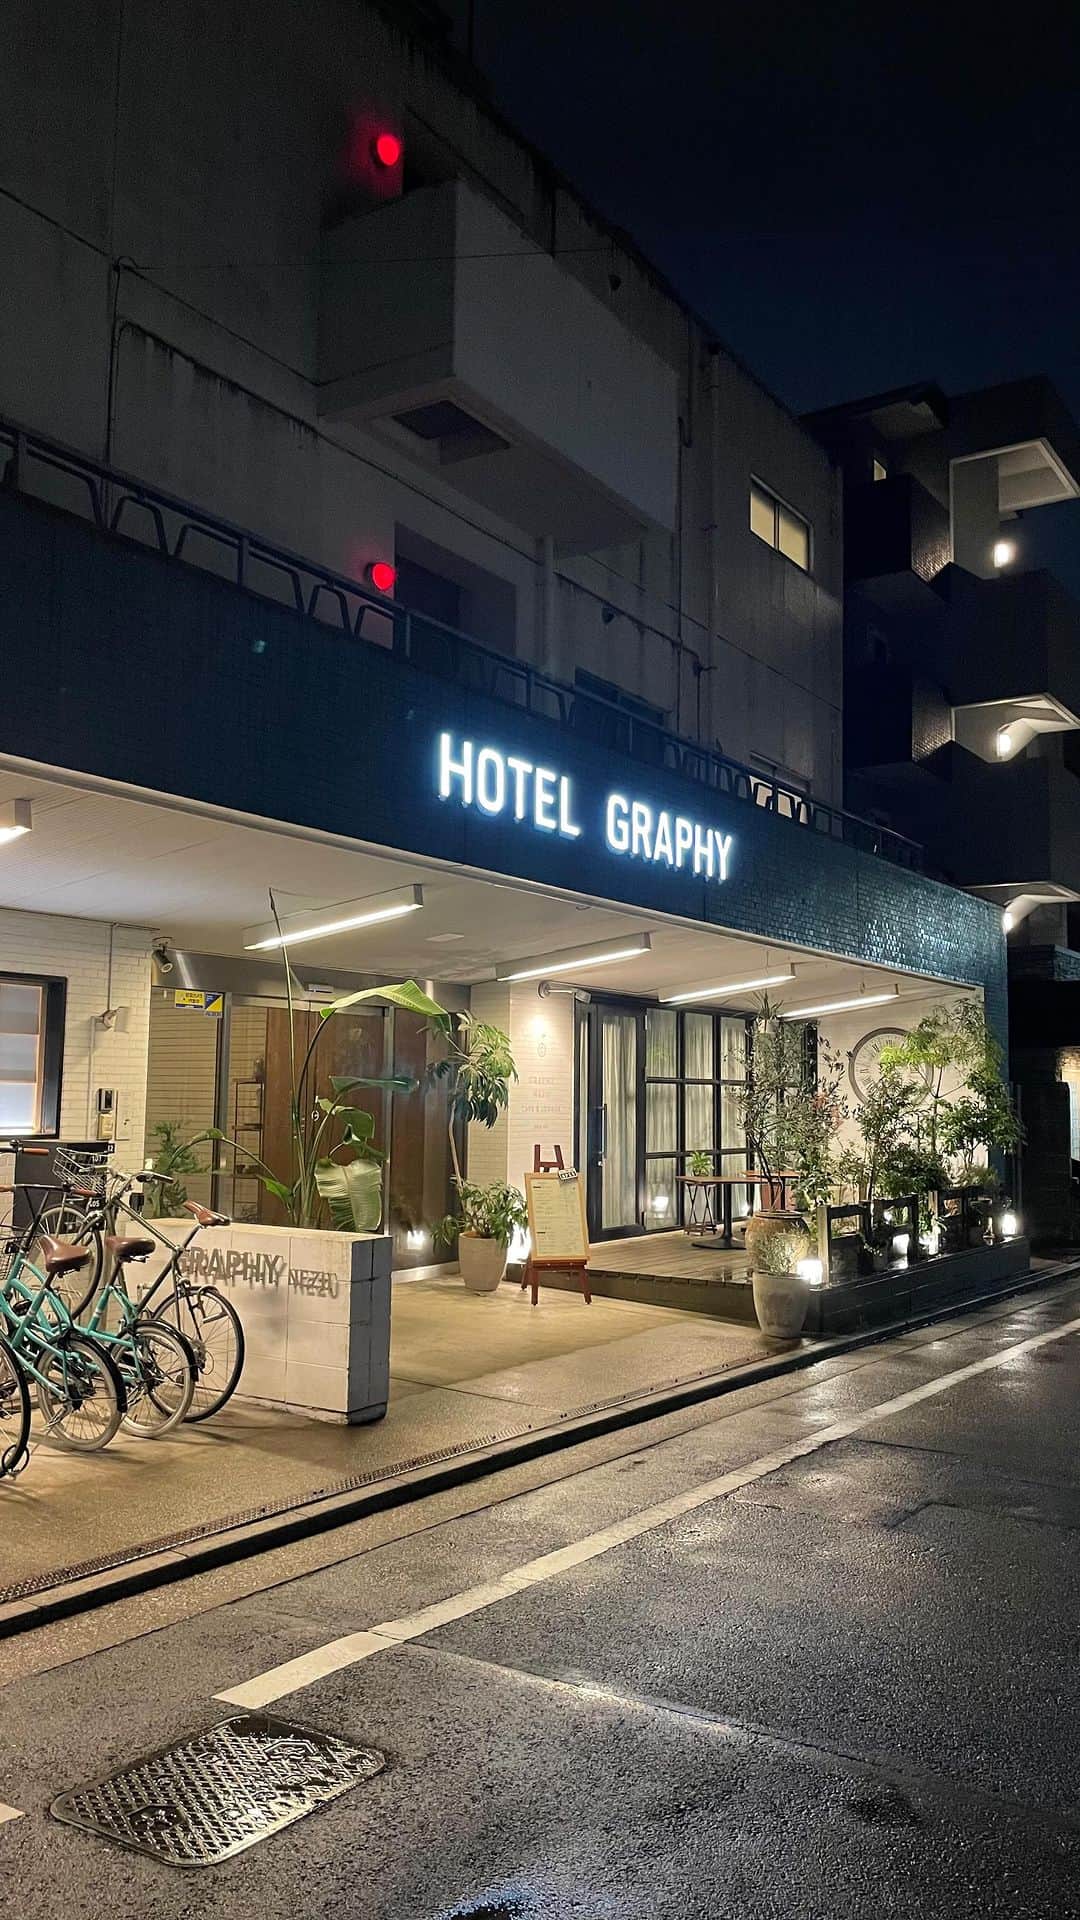 hotelgraphynezuのインスタグラム：「ホテルグラフィー根津は東京下町の谷根千にあるライフスタイルホテルです。  ホテルグラフィー根津の近くには上野公園・アメ横・上野美術館・谷中銀座があります。飲みに行きたい気分でも、落ち着いているホテルに過ごしたい気分でも、ホテルグラフィー根津をおすすめしております。  グルメなレストランや美味しいパン屋やおしゃれなカフェが集まる場所なので、谷根千を散歩したことない方々是非遊びに来てください。  HOTEL GRAPHY NEZU is a unique lifestyle hotel located in Yanesen area.  We are just close by Ueno park, Ameyoko, Museums and the famous Yanaka Ginza street. Even if you are in a mood for drinking or if you would like to have a relax time in a quiet place, HOTEL GRAPHY NEZU will welcome you warmly.  We definitely recommend you to explore Yanesen area and enjoy a stay with us if you like to refresh by discovering trendy cafes, high quality restaurants and the best bakeries in Tokyo.  —————————- #livelyhotels #explorelively #exploretheworld #expandyourworld #hotelgraphynezu   #ホテルグラフィー根津　#根津グルメ #根津ホテル #谷根千　#東京ホテル　＃下町　#谷中銀座　#ライフスタイルホテル　#池之端　#東京旅 #yanakaginza #ueno #tokyotrip #tokyostay #traveljapan #hotelstay #hotelinjapan #coffeelove #reelsinstagram」